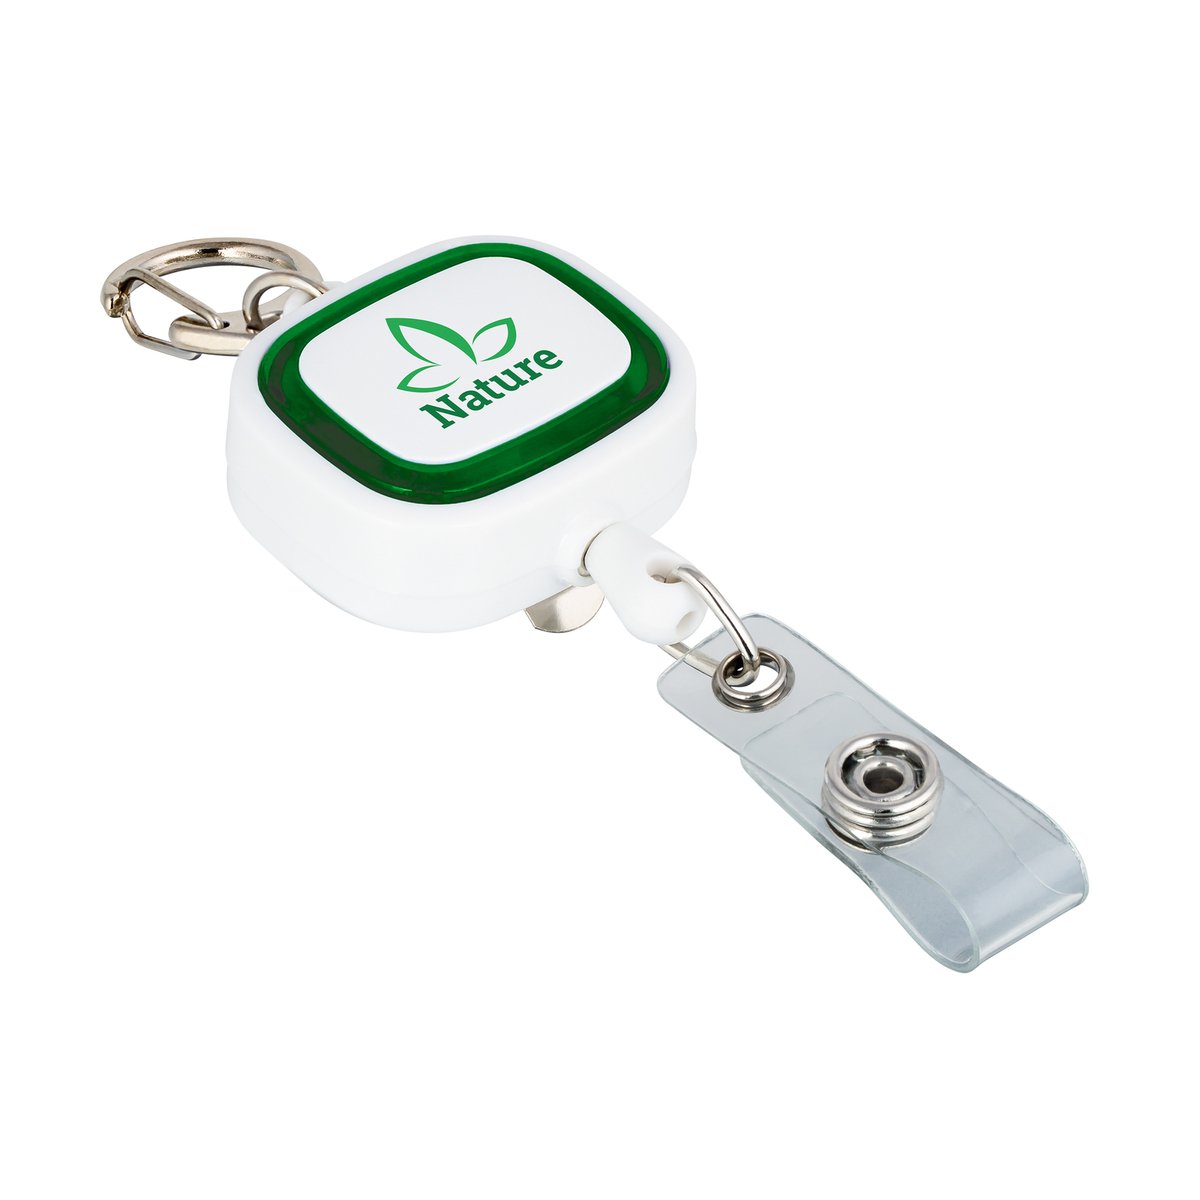 Retractable ID holder COLLECTION 500 green